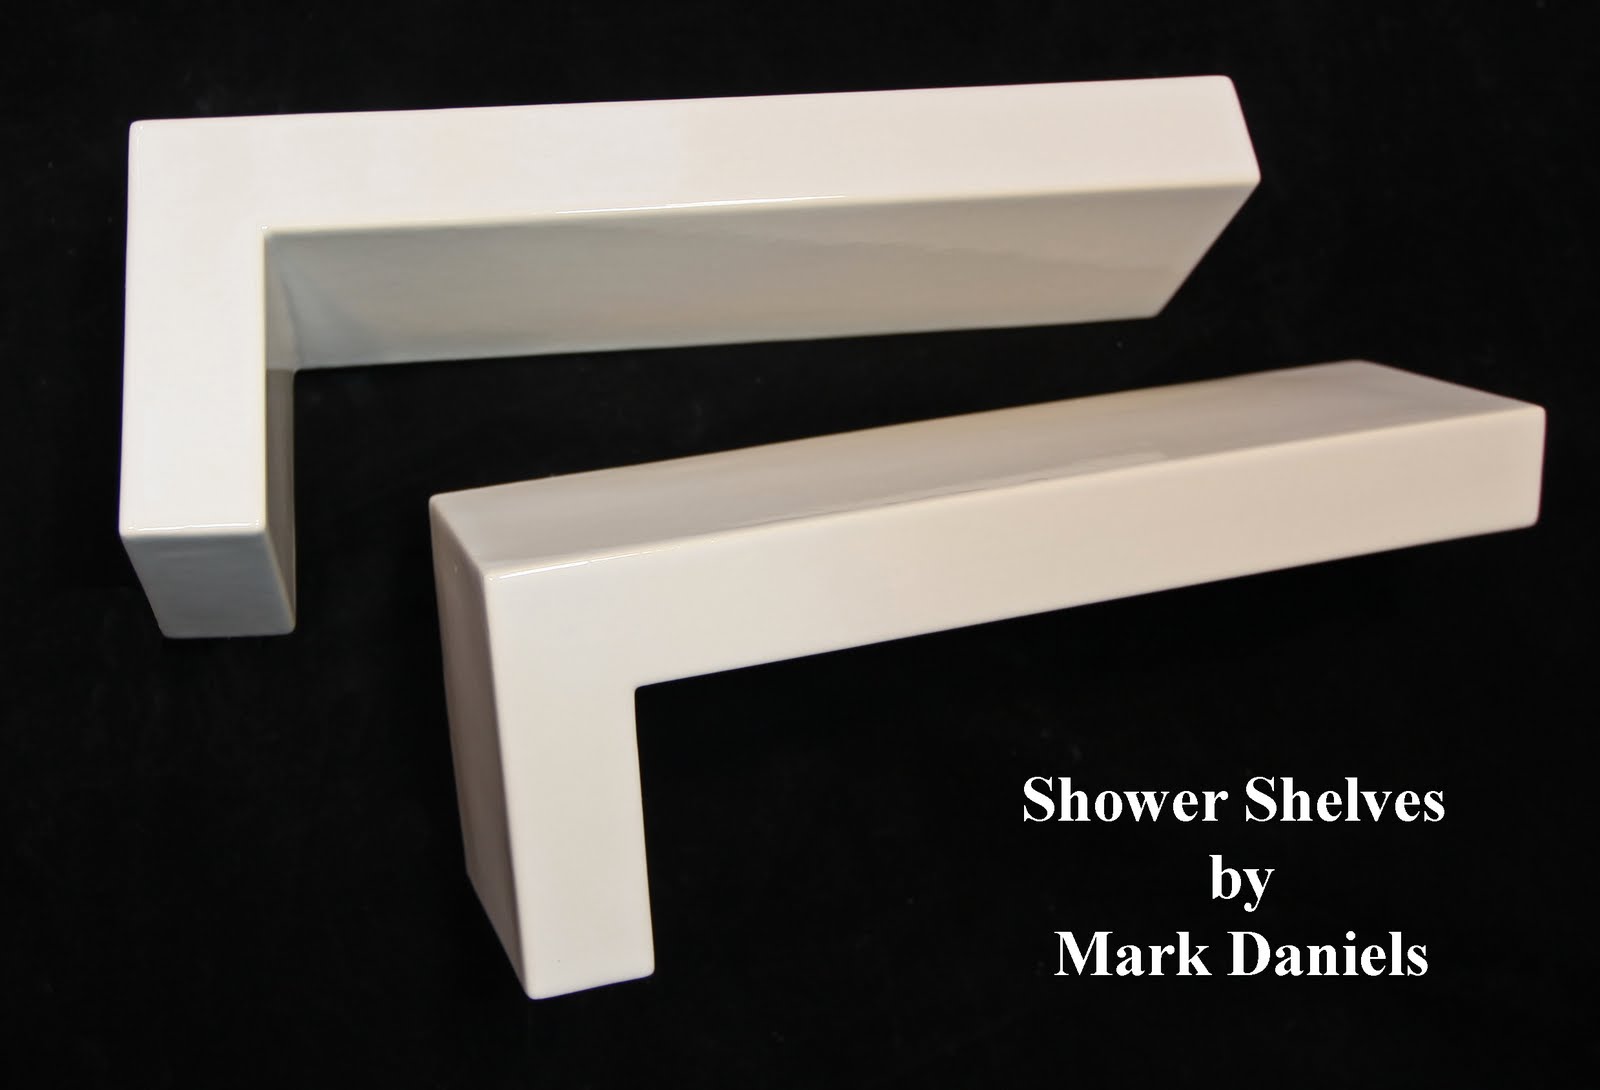 shower shelves is only limited by imagination. Shower shelves and